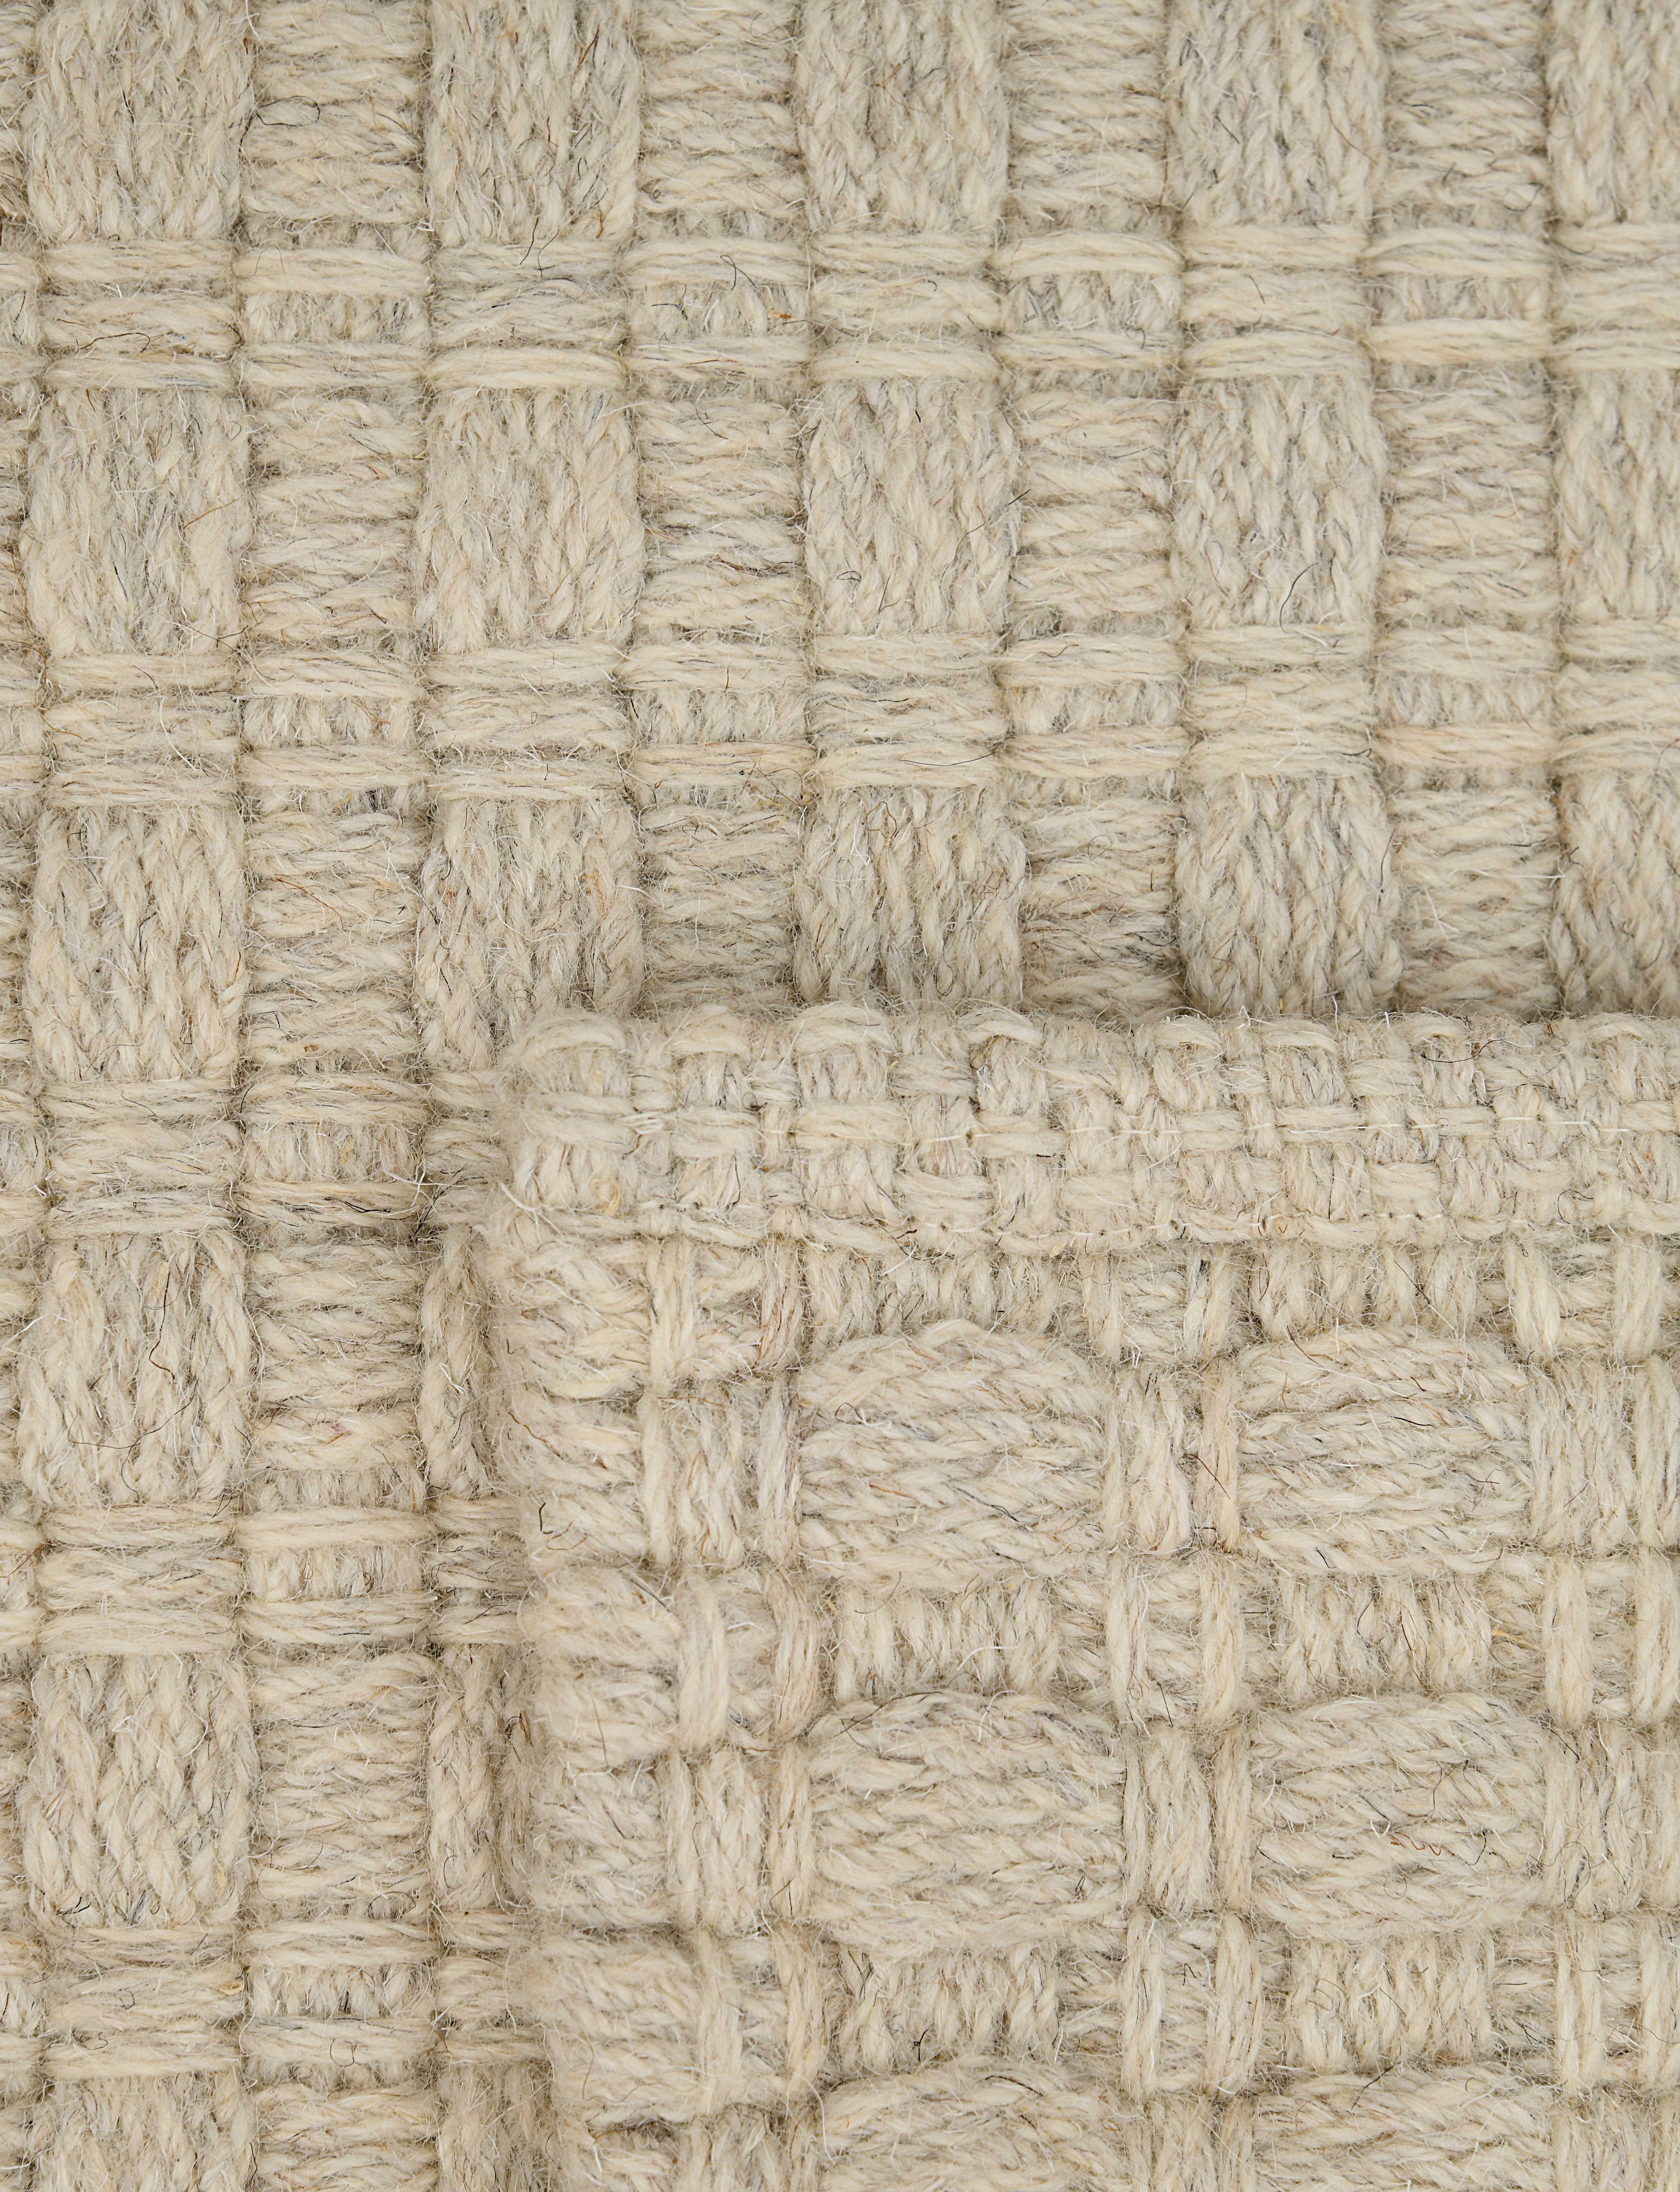 Hand-Woven Una, Ash, Handwoven Face 60% Undyed NZ Wool, 40% Undyed MED Wool, 6' x 9' For Sale